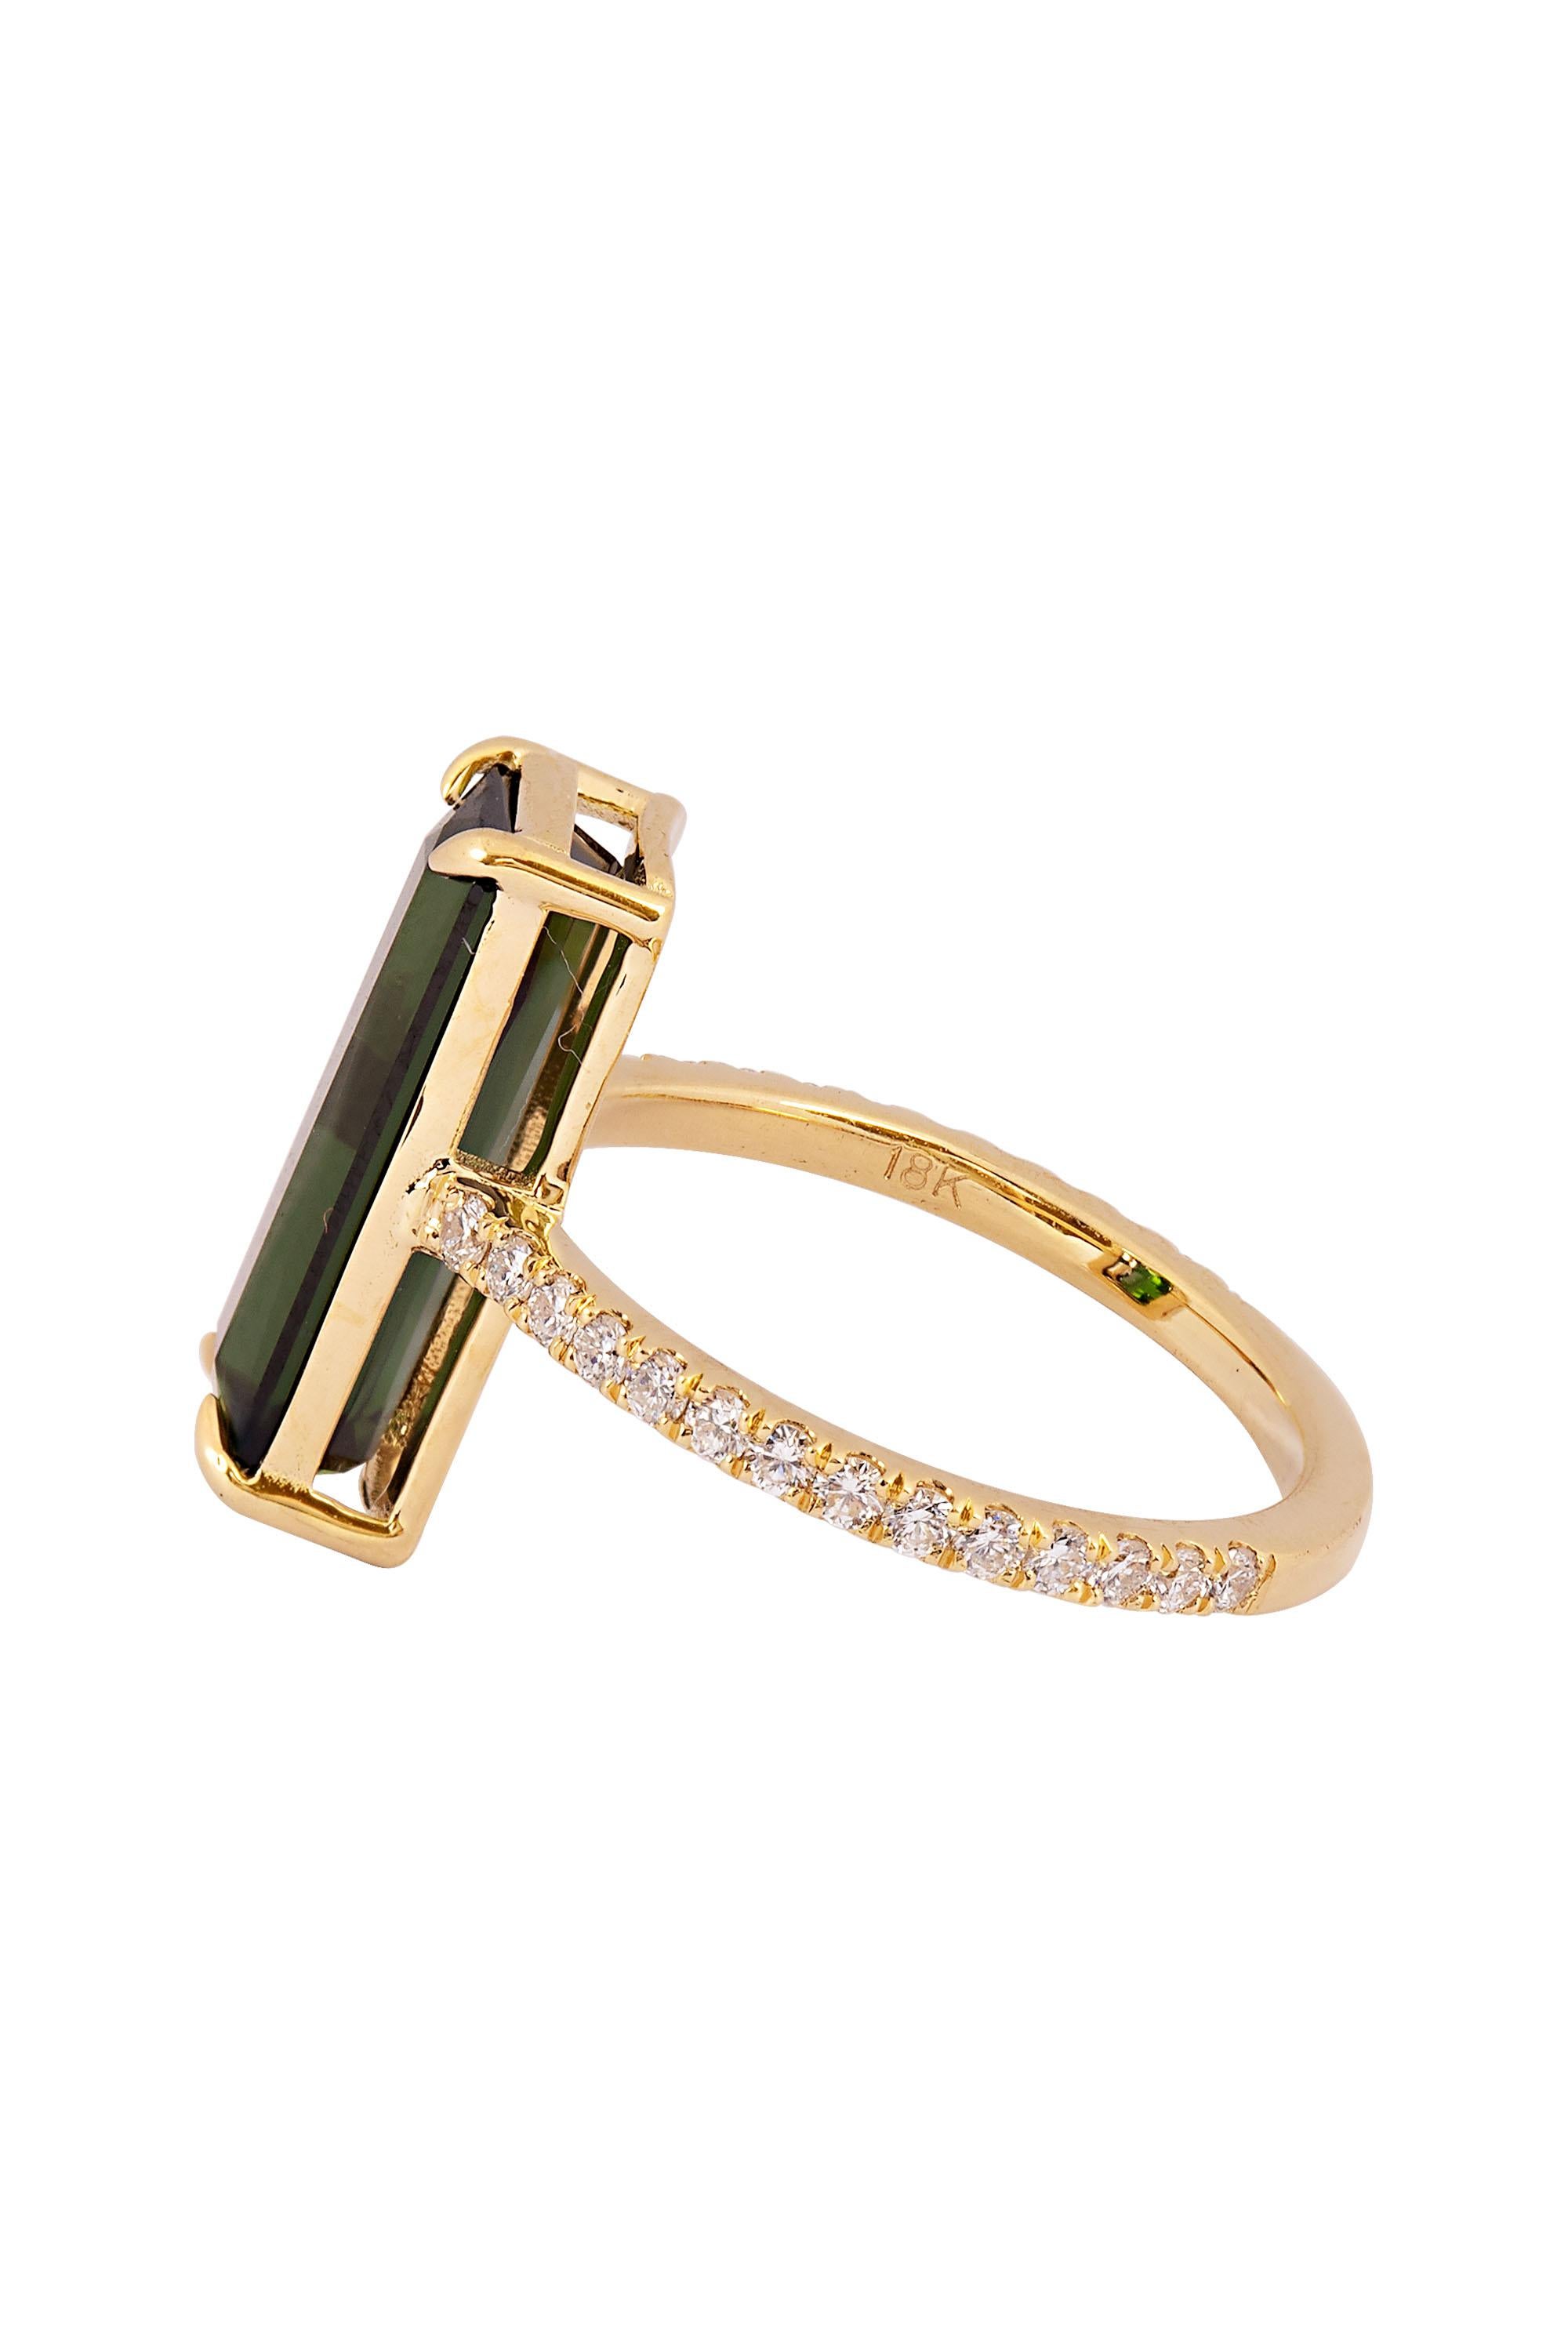 This stylish ring is composed of an elegant rectangle of rich green tourmaline mounted atop a streamlined ring of 18 karat yellow gold highlighted by pave diamond shoulders. With an approximate total diamond weight of .75 carats. Current ring size